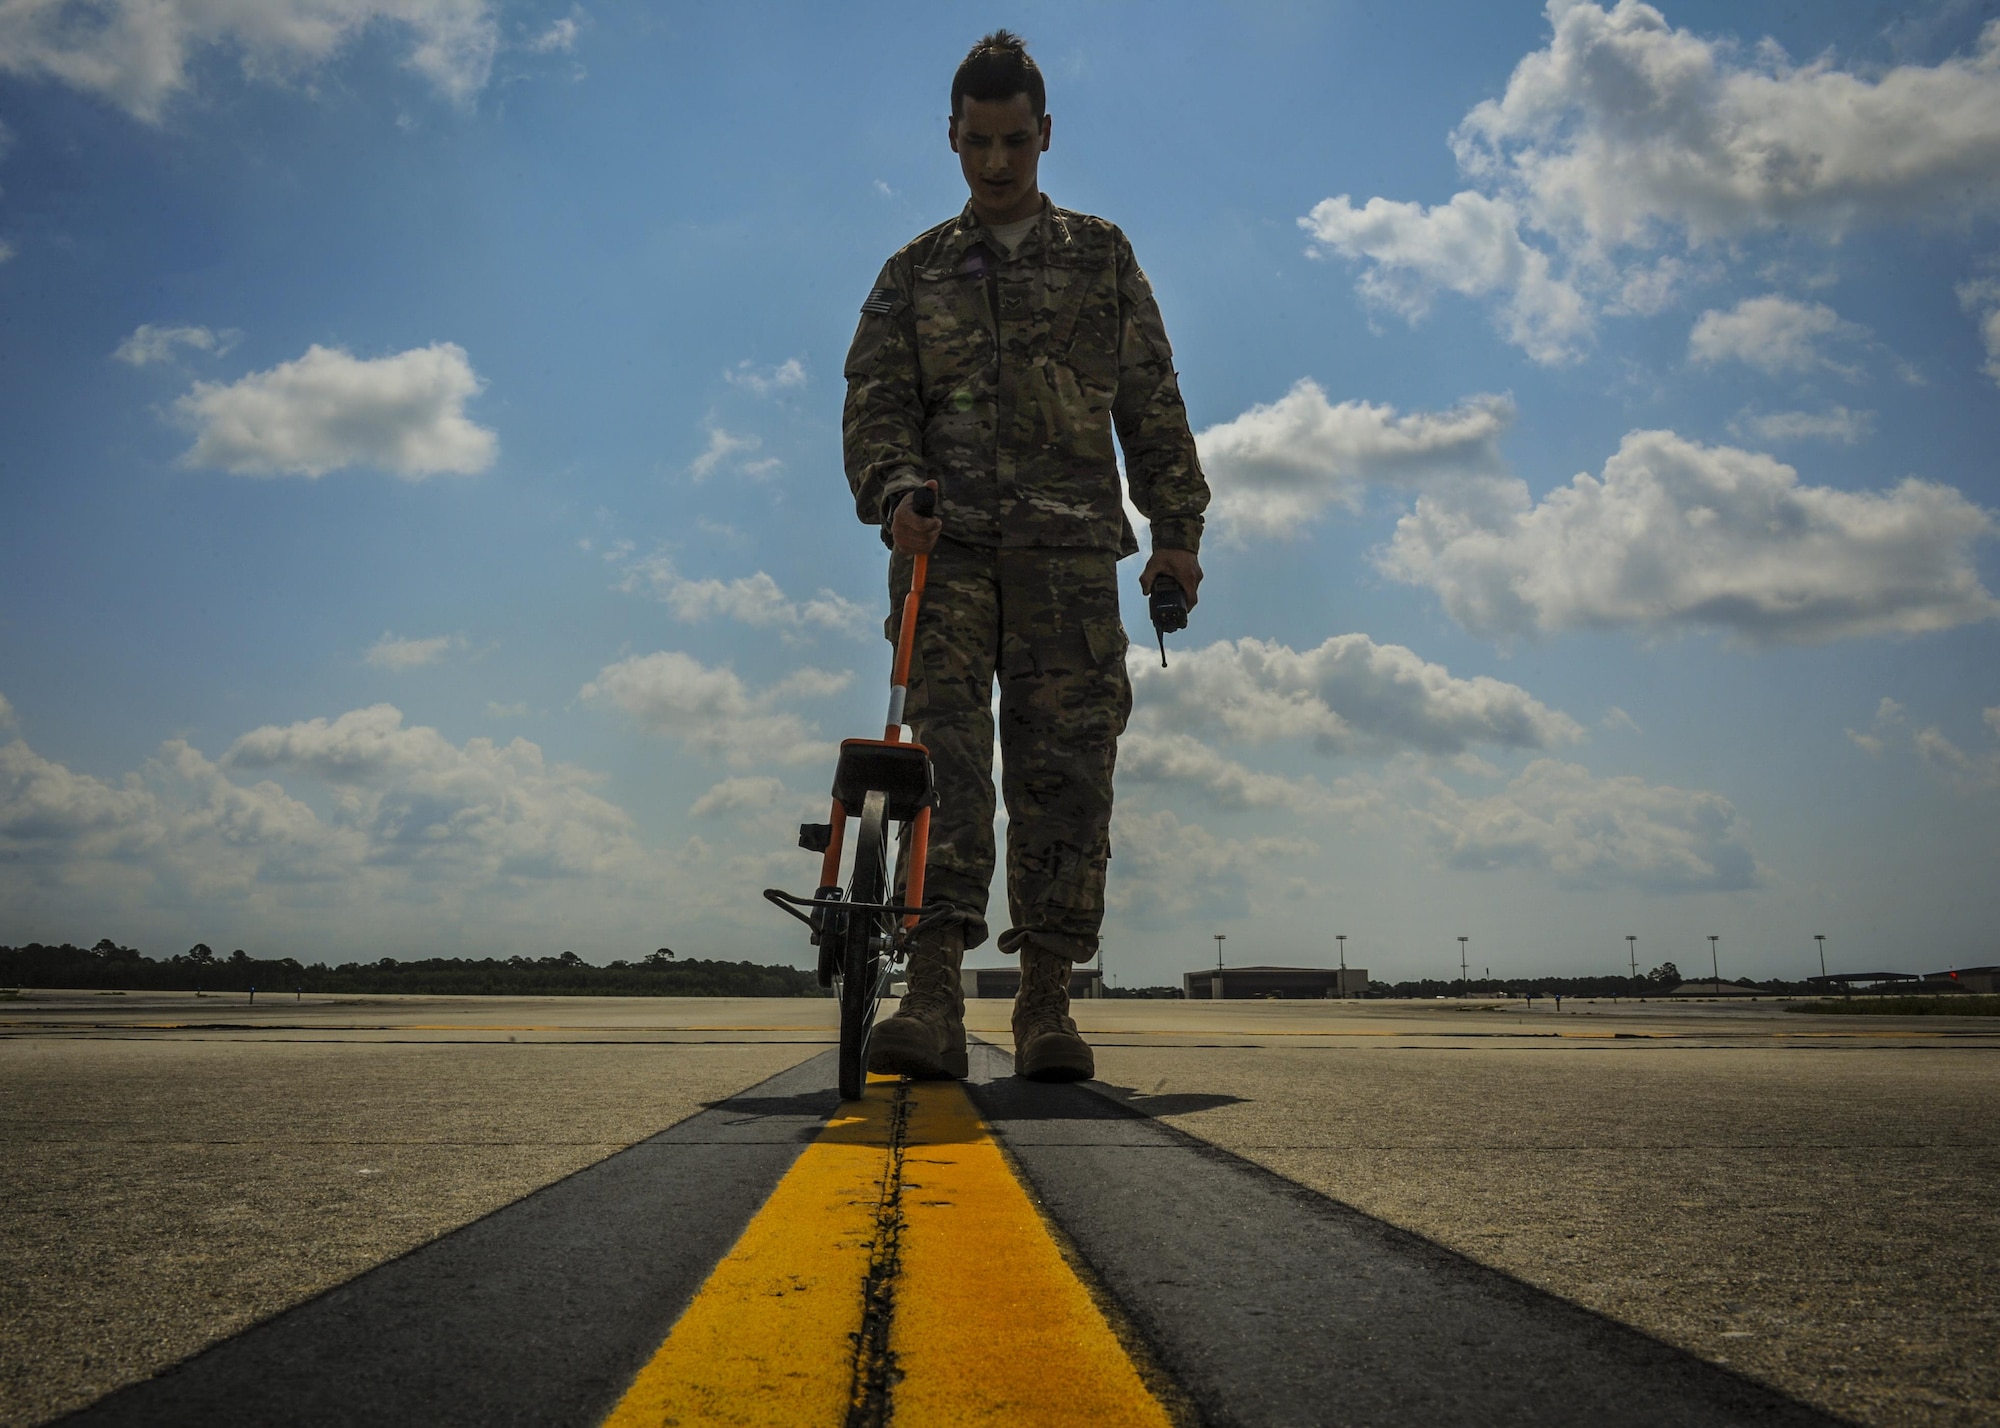 Senior Airman David Rios, an airfield manager with the 1st Special Operations Support Squadron, uses a wheel measurement at Hurlburt Field, Fla., June 17, 2016. Routine airfield checks are performed to inspect and maintain the airfield to prevent any mishaps during aircraft movement. (U.S. Air Force photo by Airman 1st Class Joseph Pick)